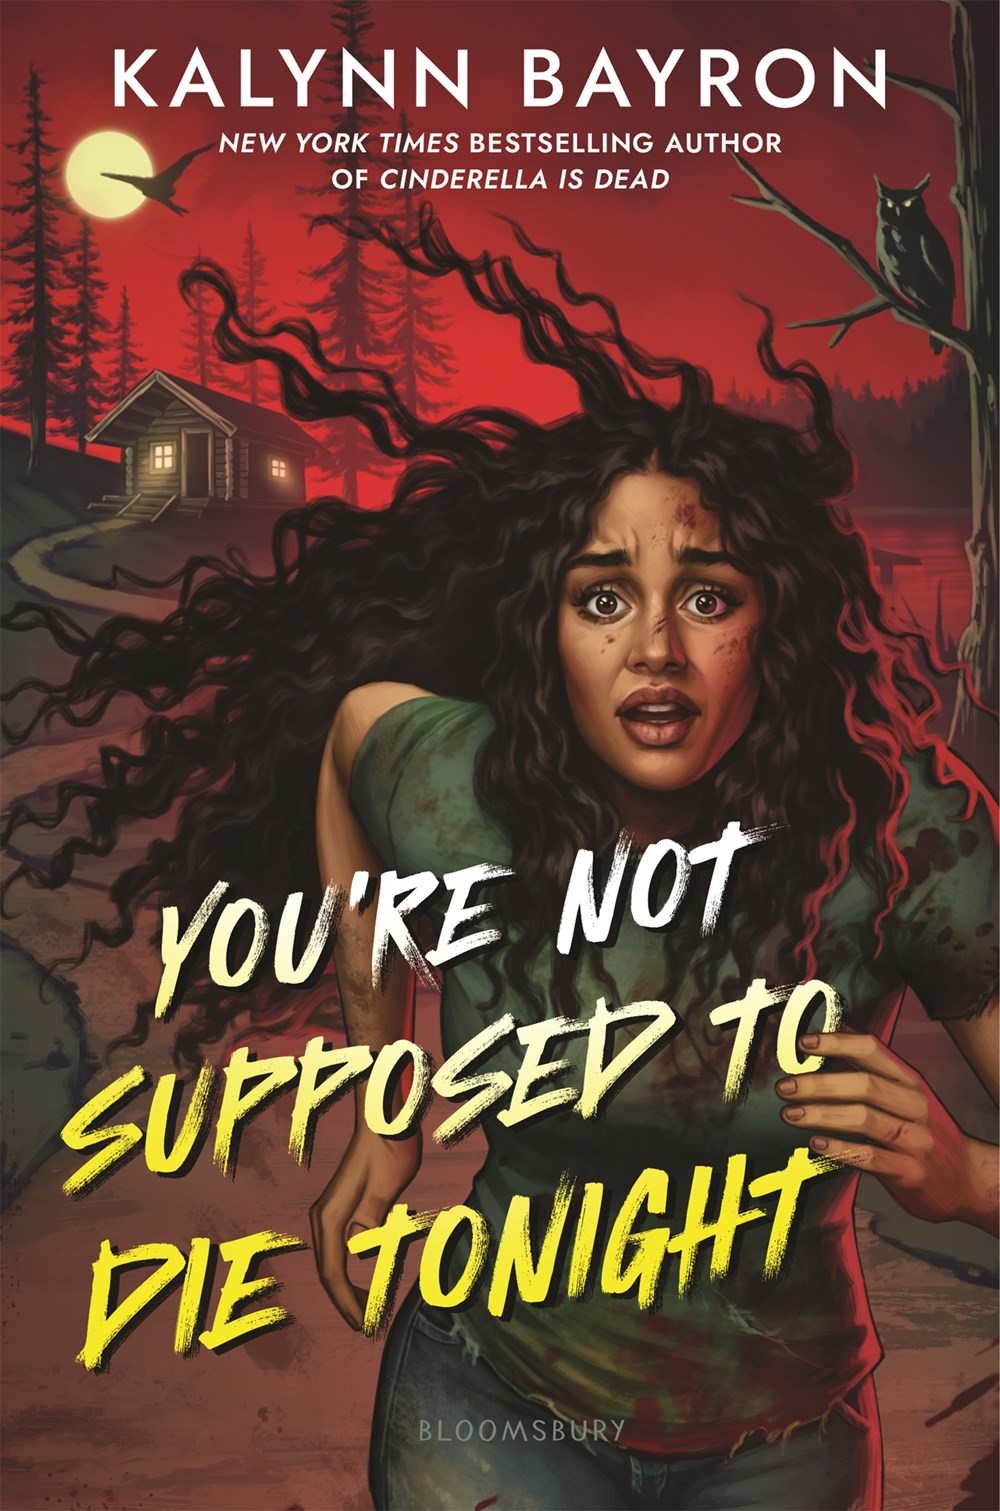 You’re Not Supposed to Die Tonight by Kalynn Bayron